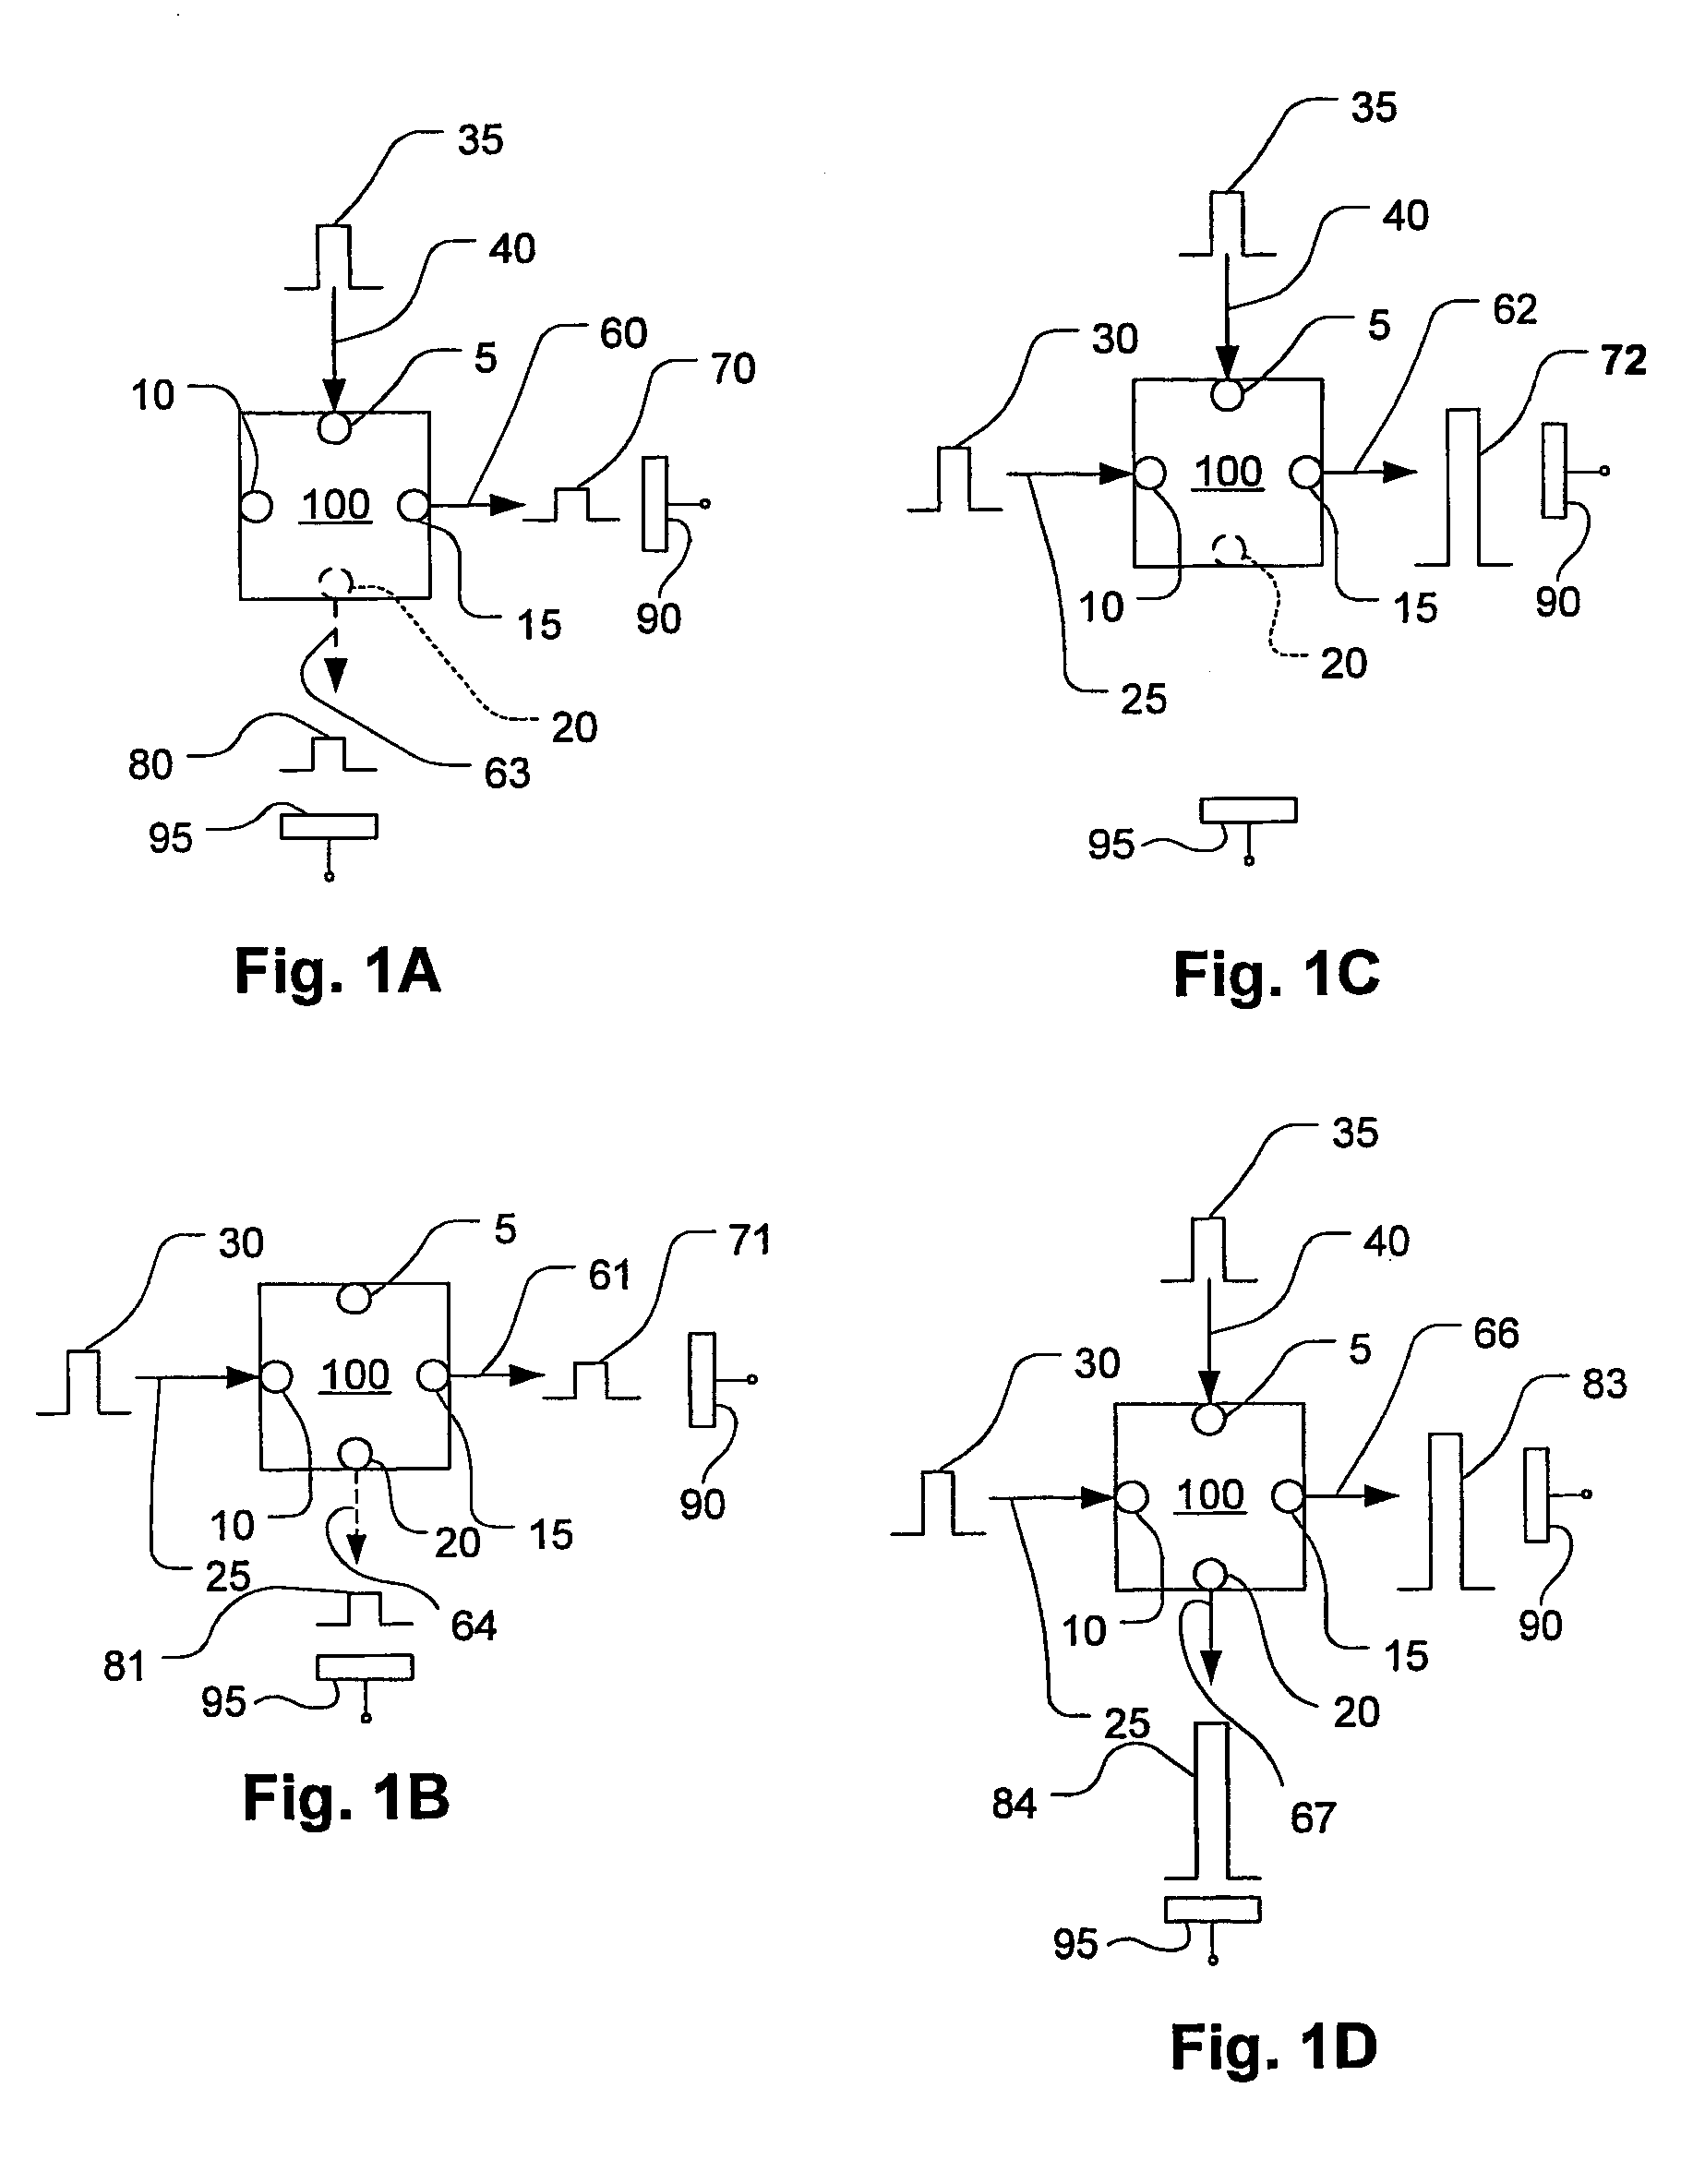 All optical decoding systems for optical encoded data symbols